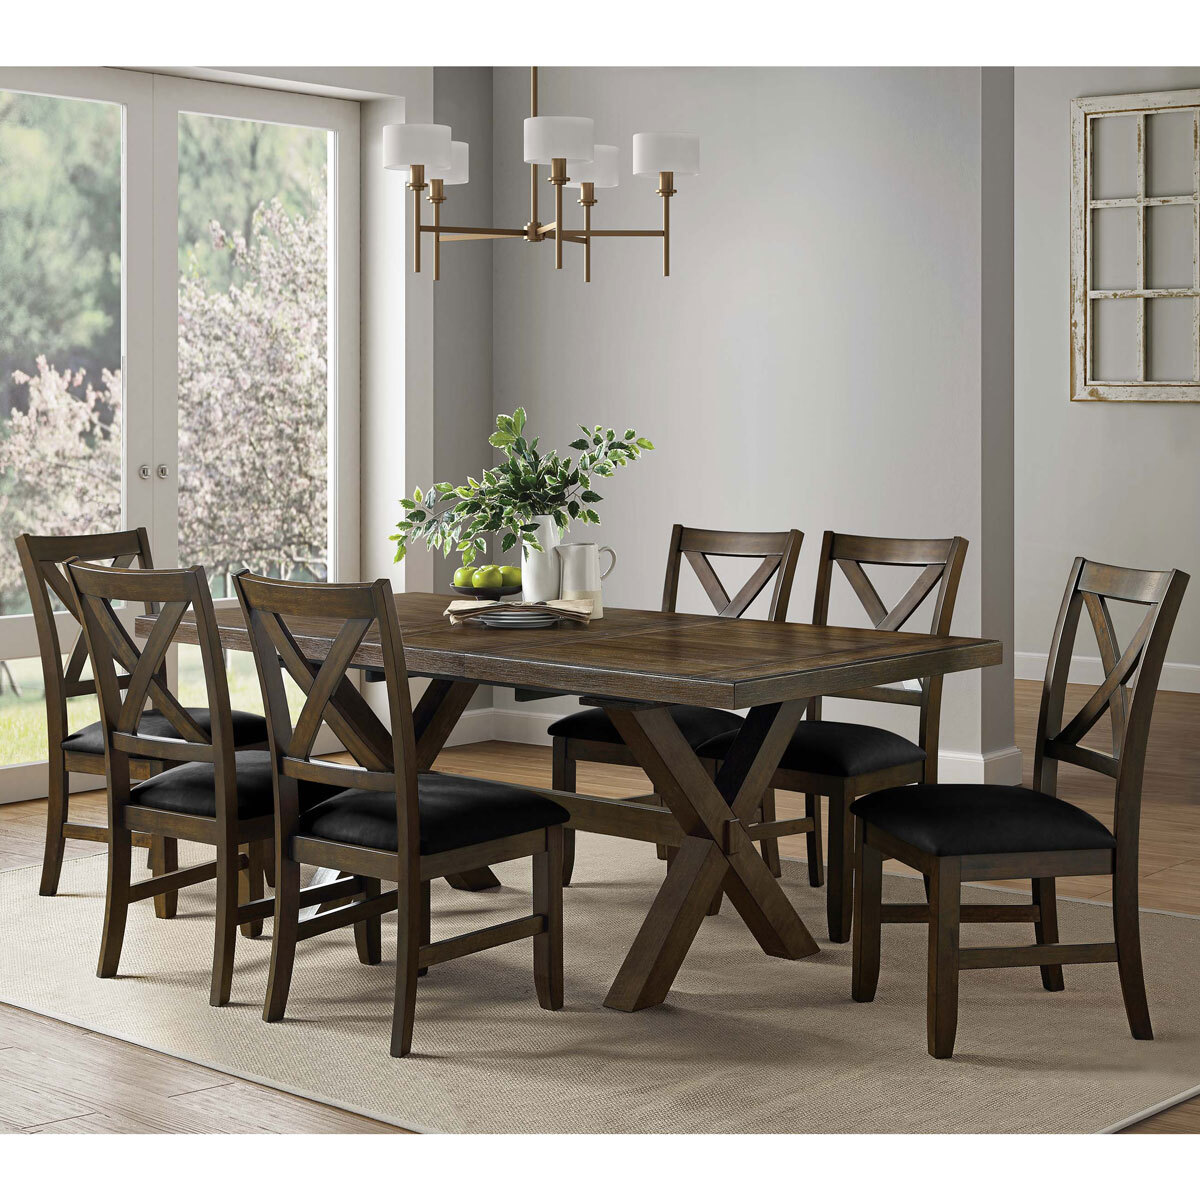 Bayside Furnishings Braeden Extending, Costco Furniture Dining Room Chairs